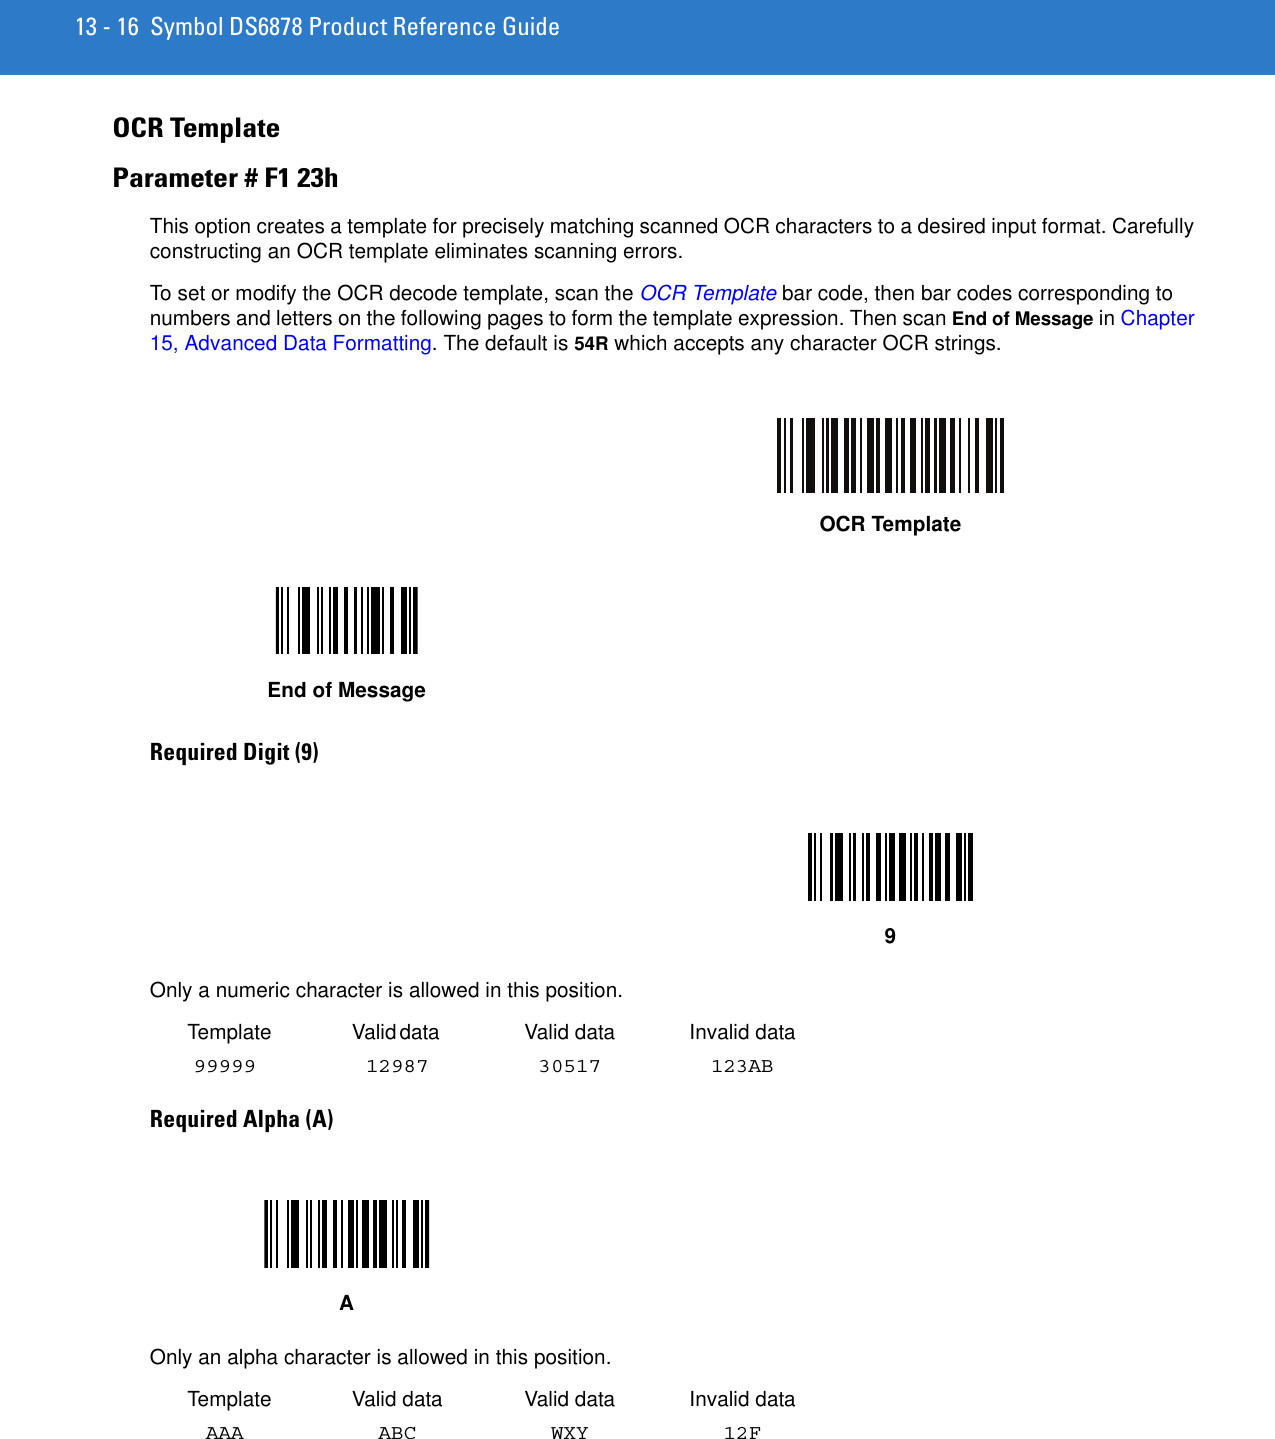 13 - 16 Symbol DS6878 Product Reference GuideOCR TemplateParameter # F1 23hThis option creates a template for precisely matching scanned OCR characters to a desired input format. Carefully constructing an OCR template eliminates scanning errors. To set or modify the OCR decode template, scan the OCR Template bar code, then bar codes corresponding to numbers and letters on the following pages to form the template expression. Then scan End of Message in Chapter 15, Advanced Data Formatting. The default is 54R which accepts any character OCR strings.Required Digit (9) Only a numeric character is allowed in this position. Template  Valid data  Valid data Invalid data99999 12987 30517 123ABRequired Alpha (A) Only an alpha character is allowed in this position. Template Valid data Valid data Invalid dataAAA ABC WXY 12FOCR TemplateEnd of Message9A